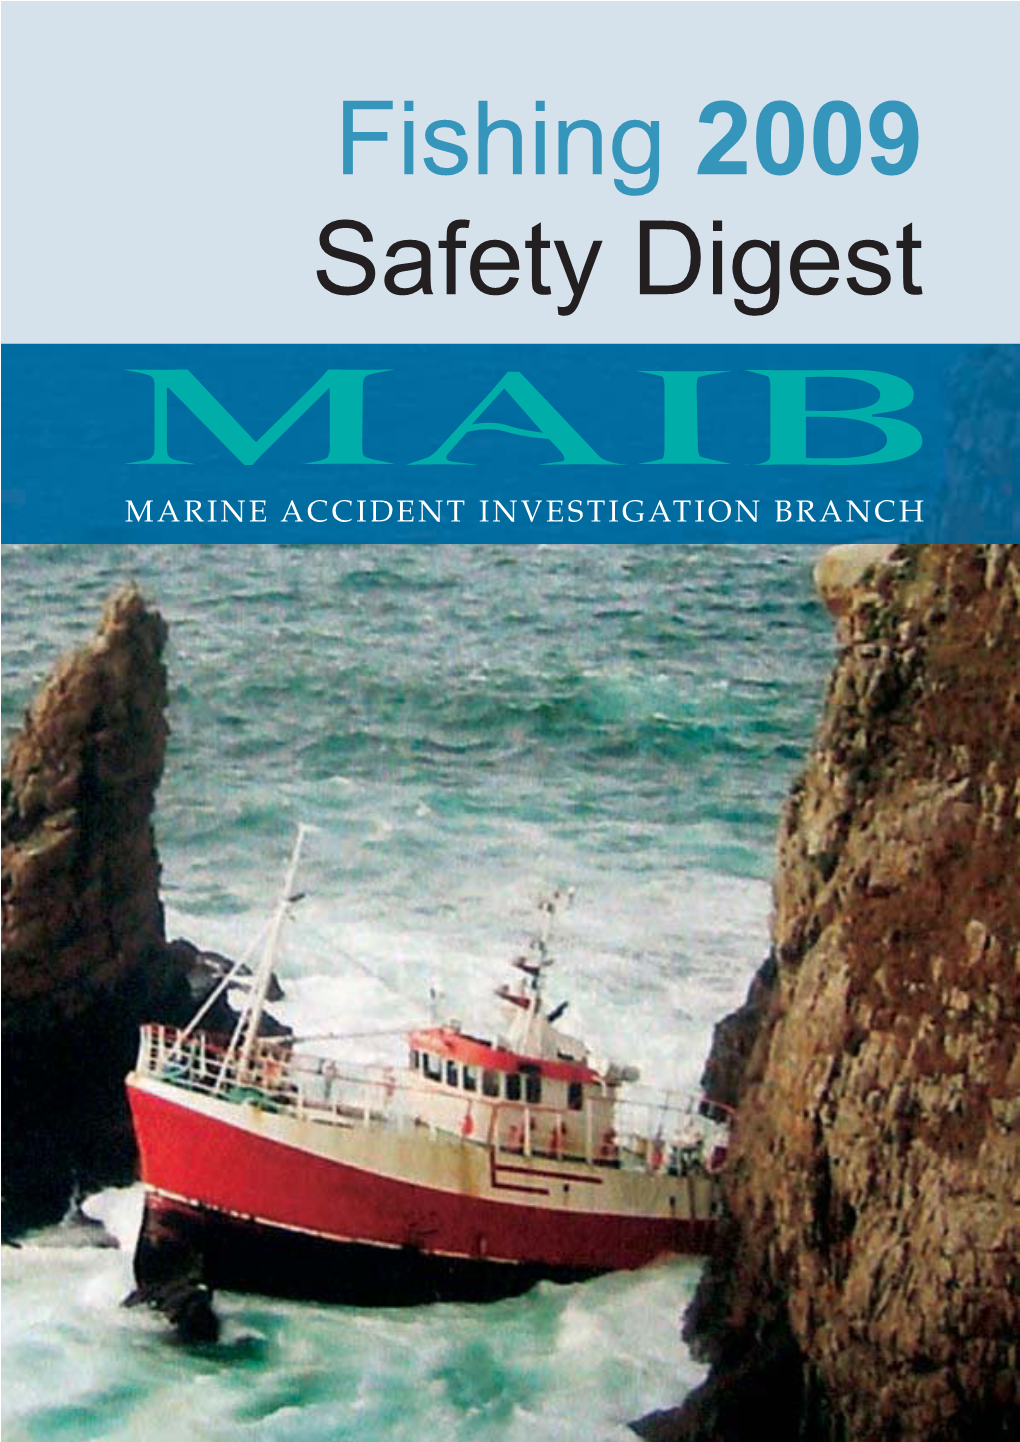 Fishing 2009 Safety Digest